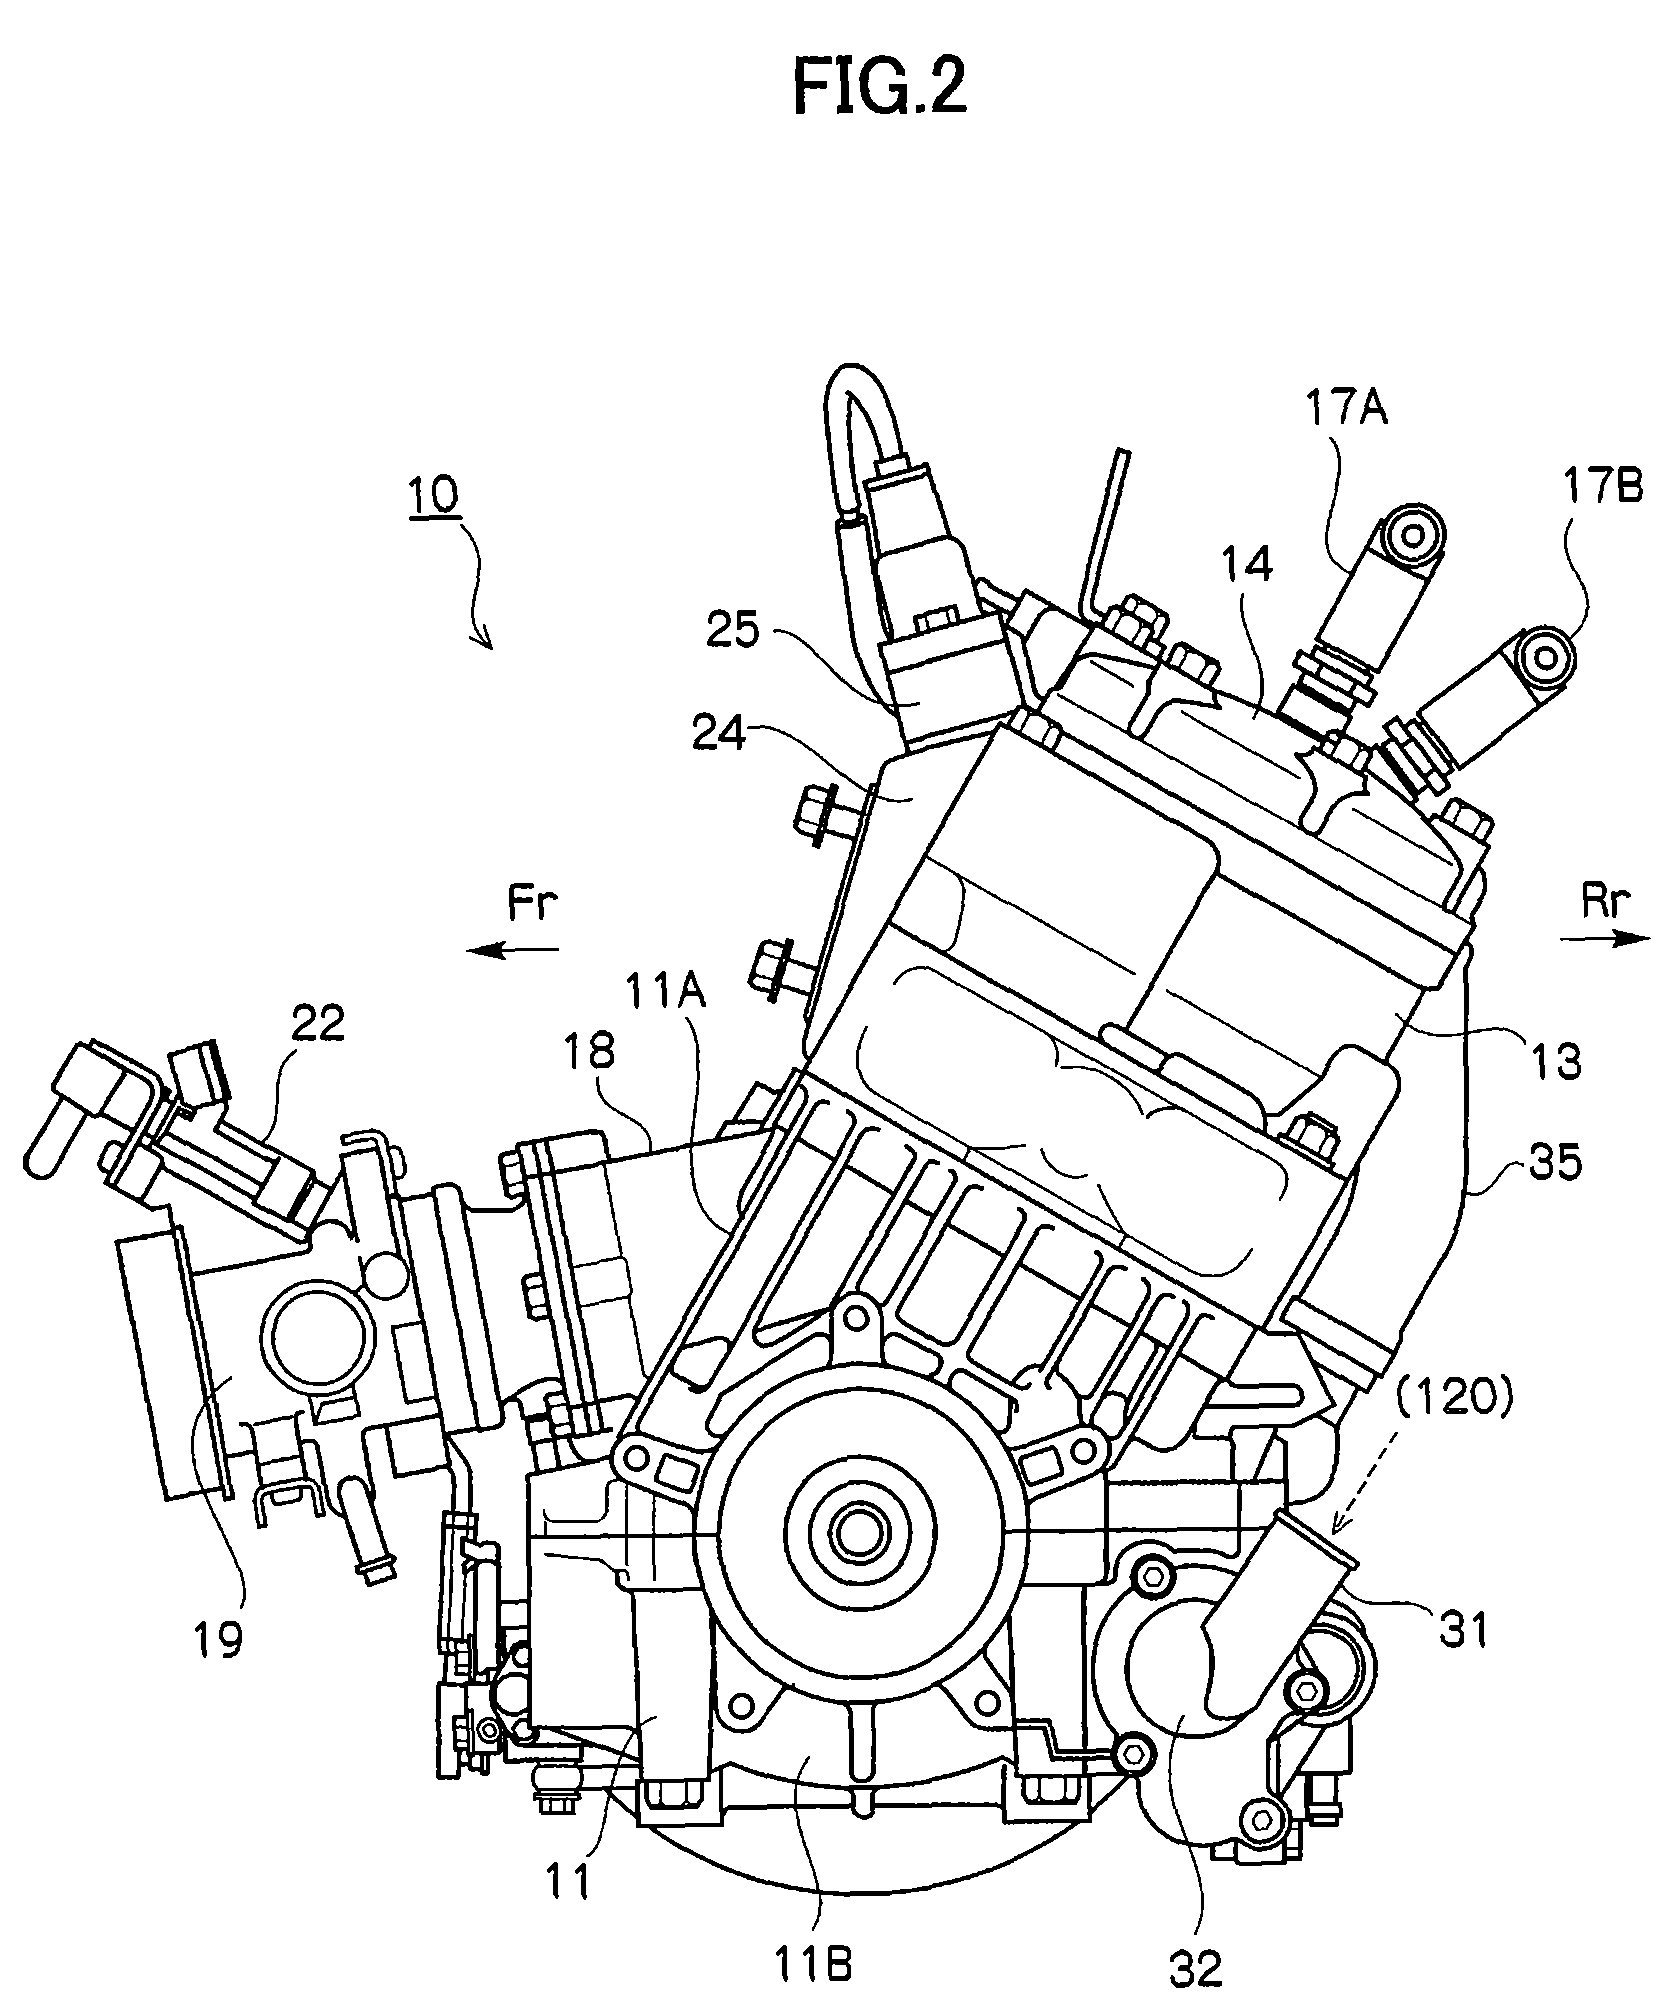 Water-cooled two-cycle engine